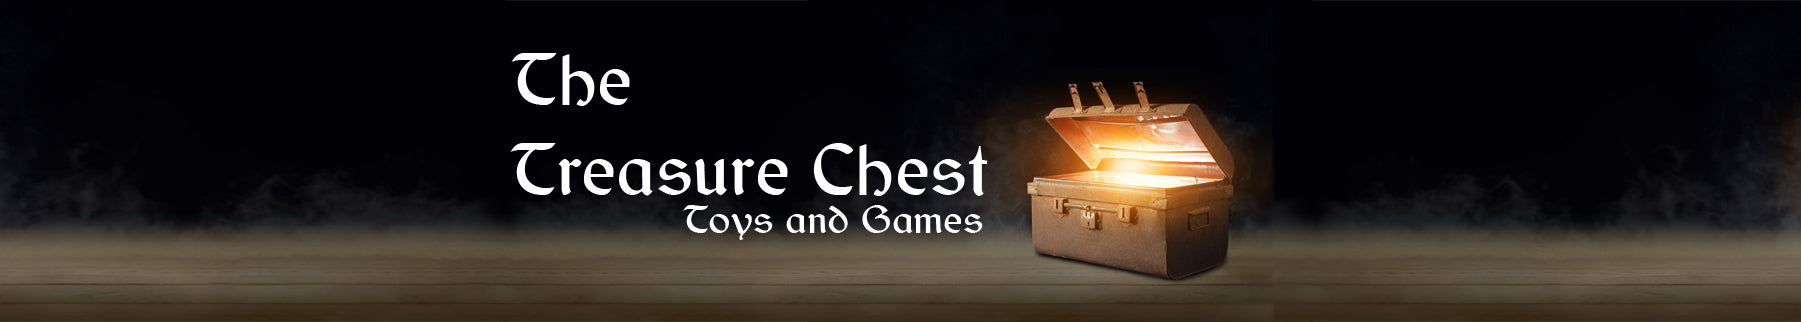 The Treasure Chest Toys and Games